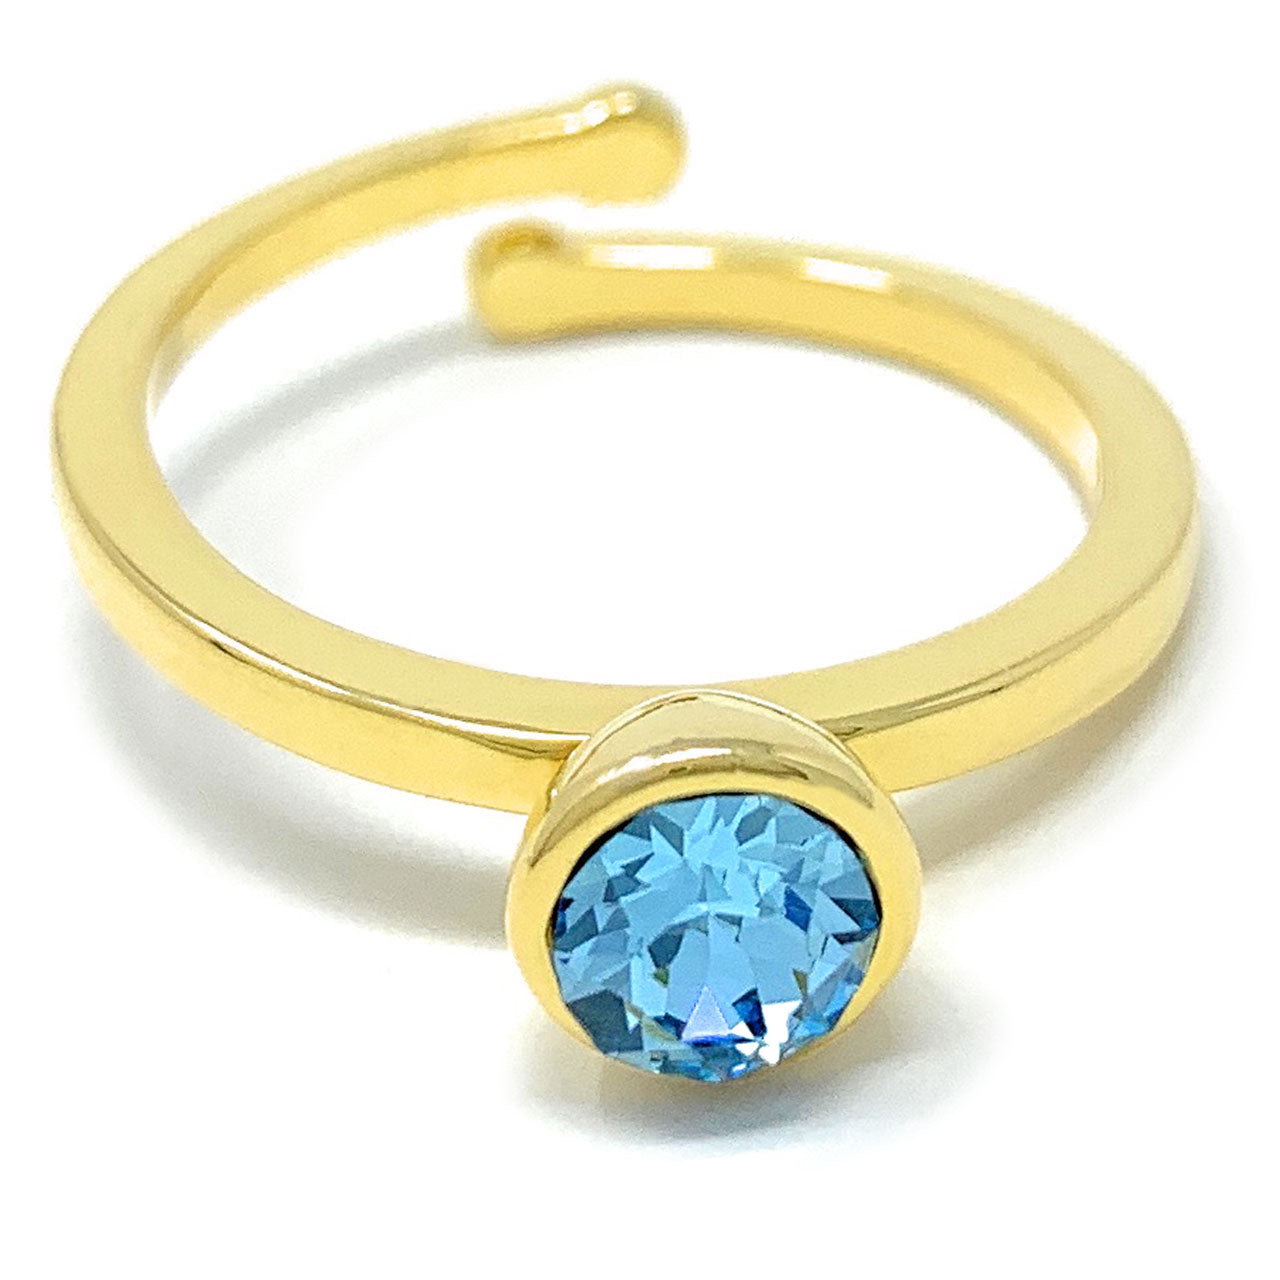 Harley Adjustable Ring with Blue Aquamarine Round Crystals from Swarovski Gold Plated - Ed Heart